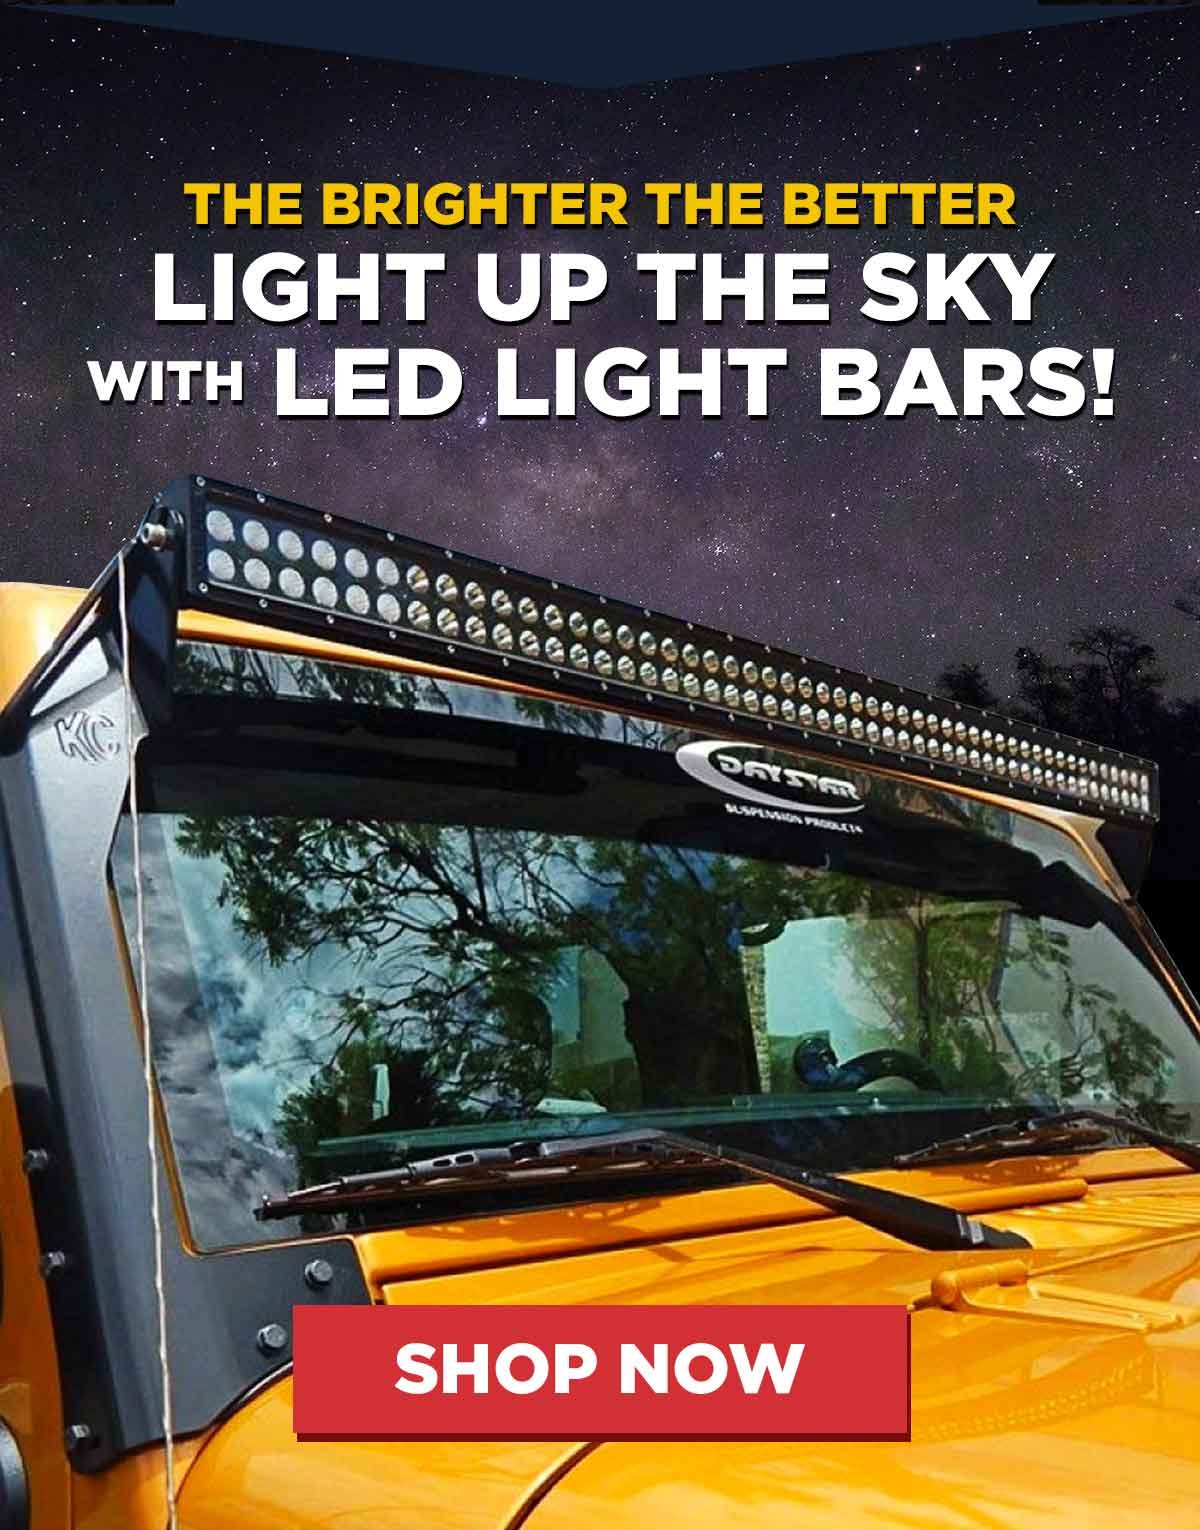 The Brighter The Better - Light Up the Sky With LED Light Bars!